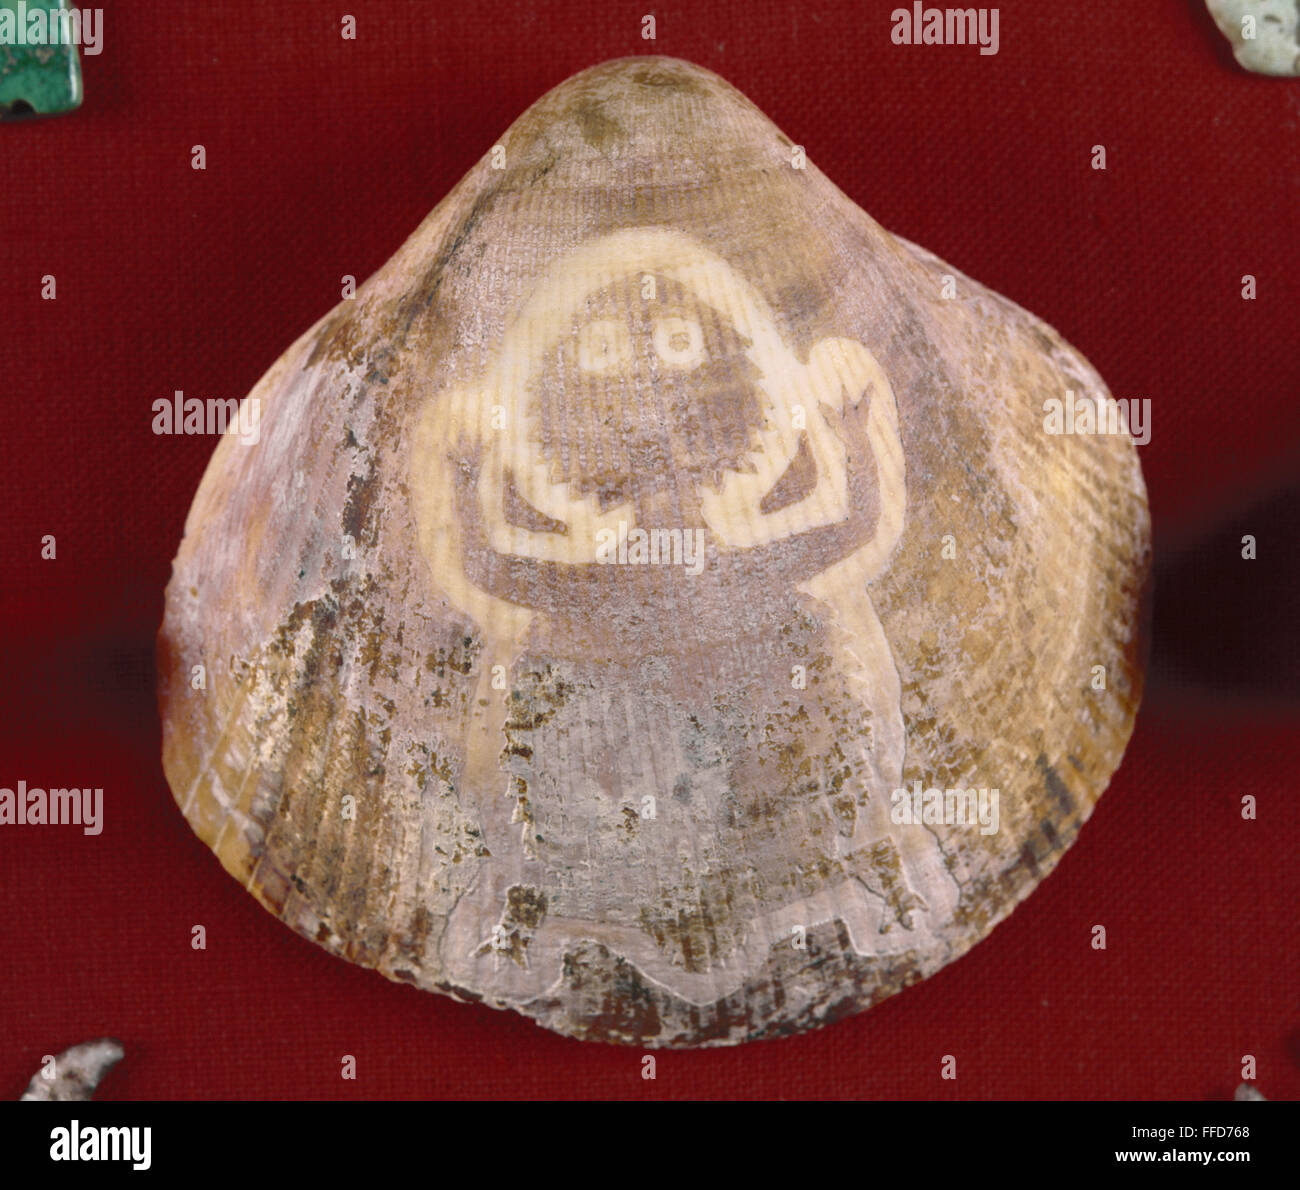 NATIVE AMERICAN ARTIFACT. /nHorned toad figure etched onto a shell with acid, Southwest Native American artifact, 700-900 A.D. Stock Photo